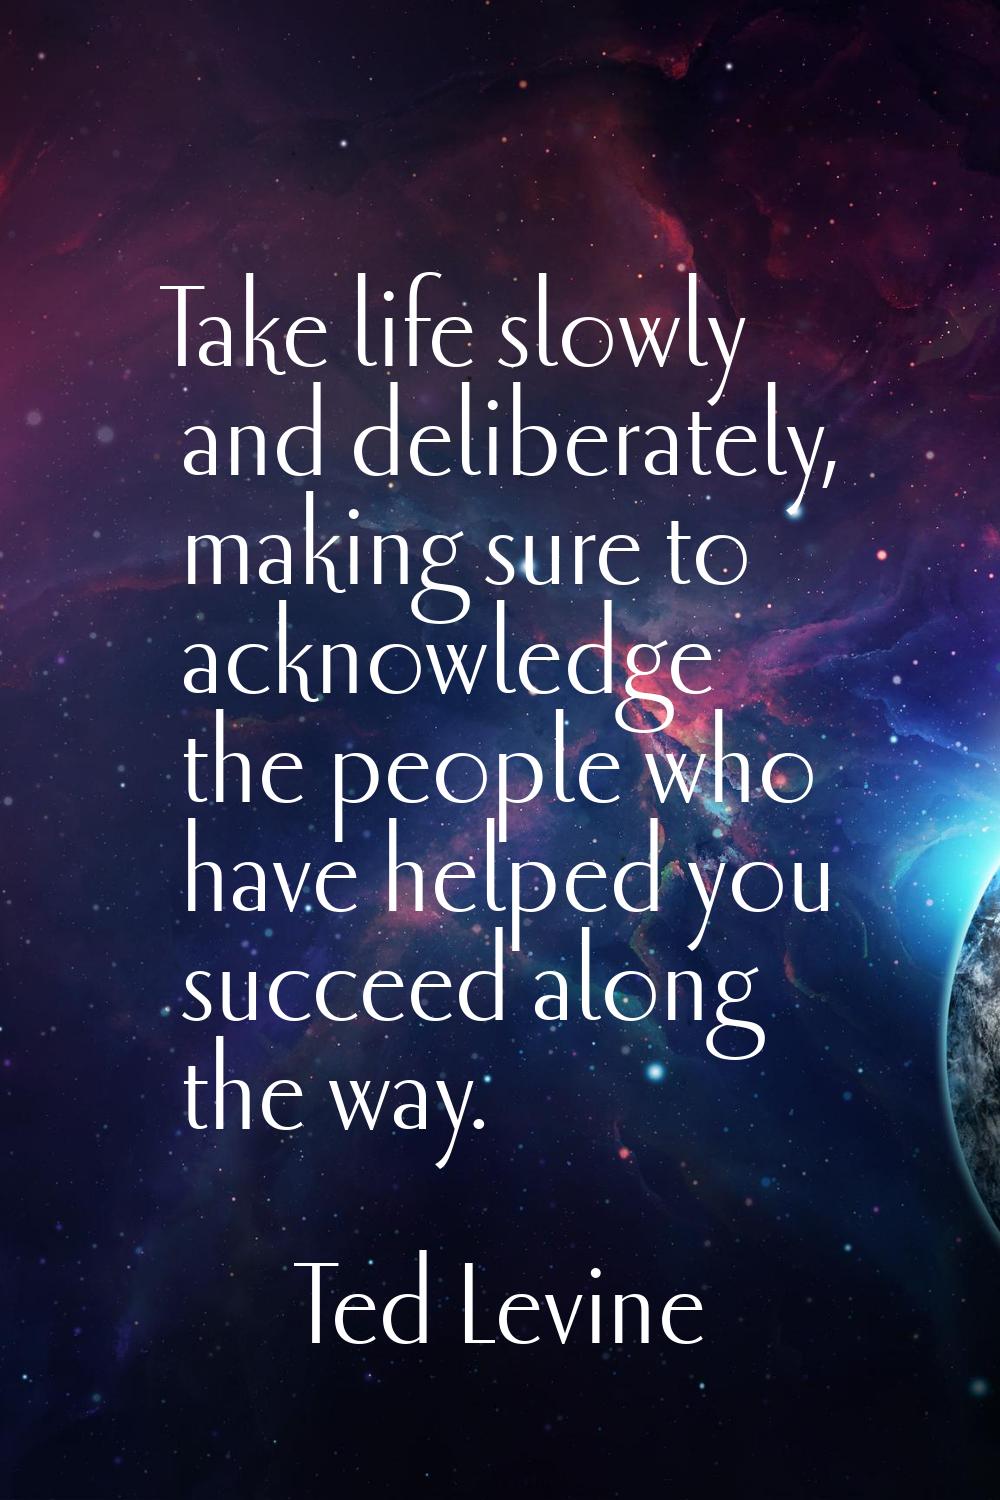 Take life slowly and deliberately, making sure to acknowledge the people who have helped you succee